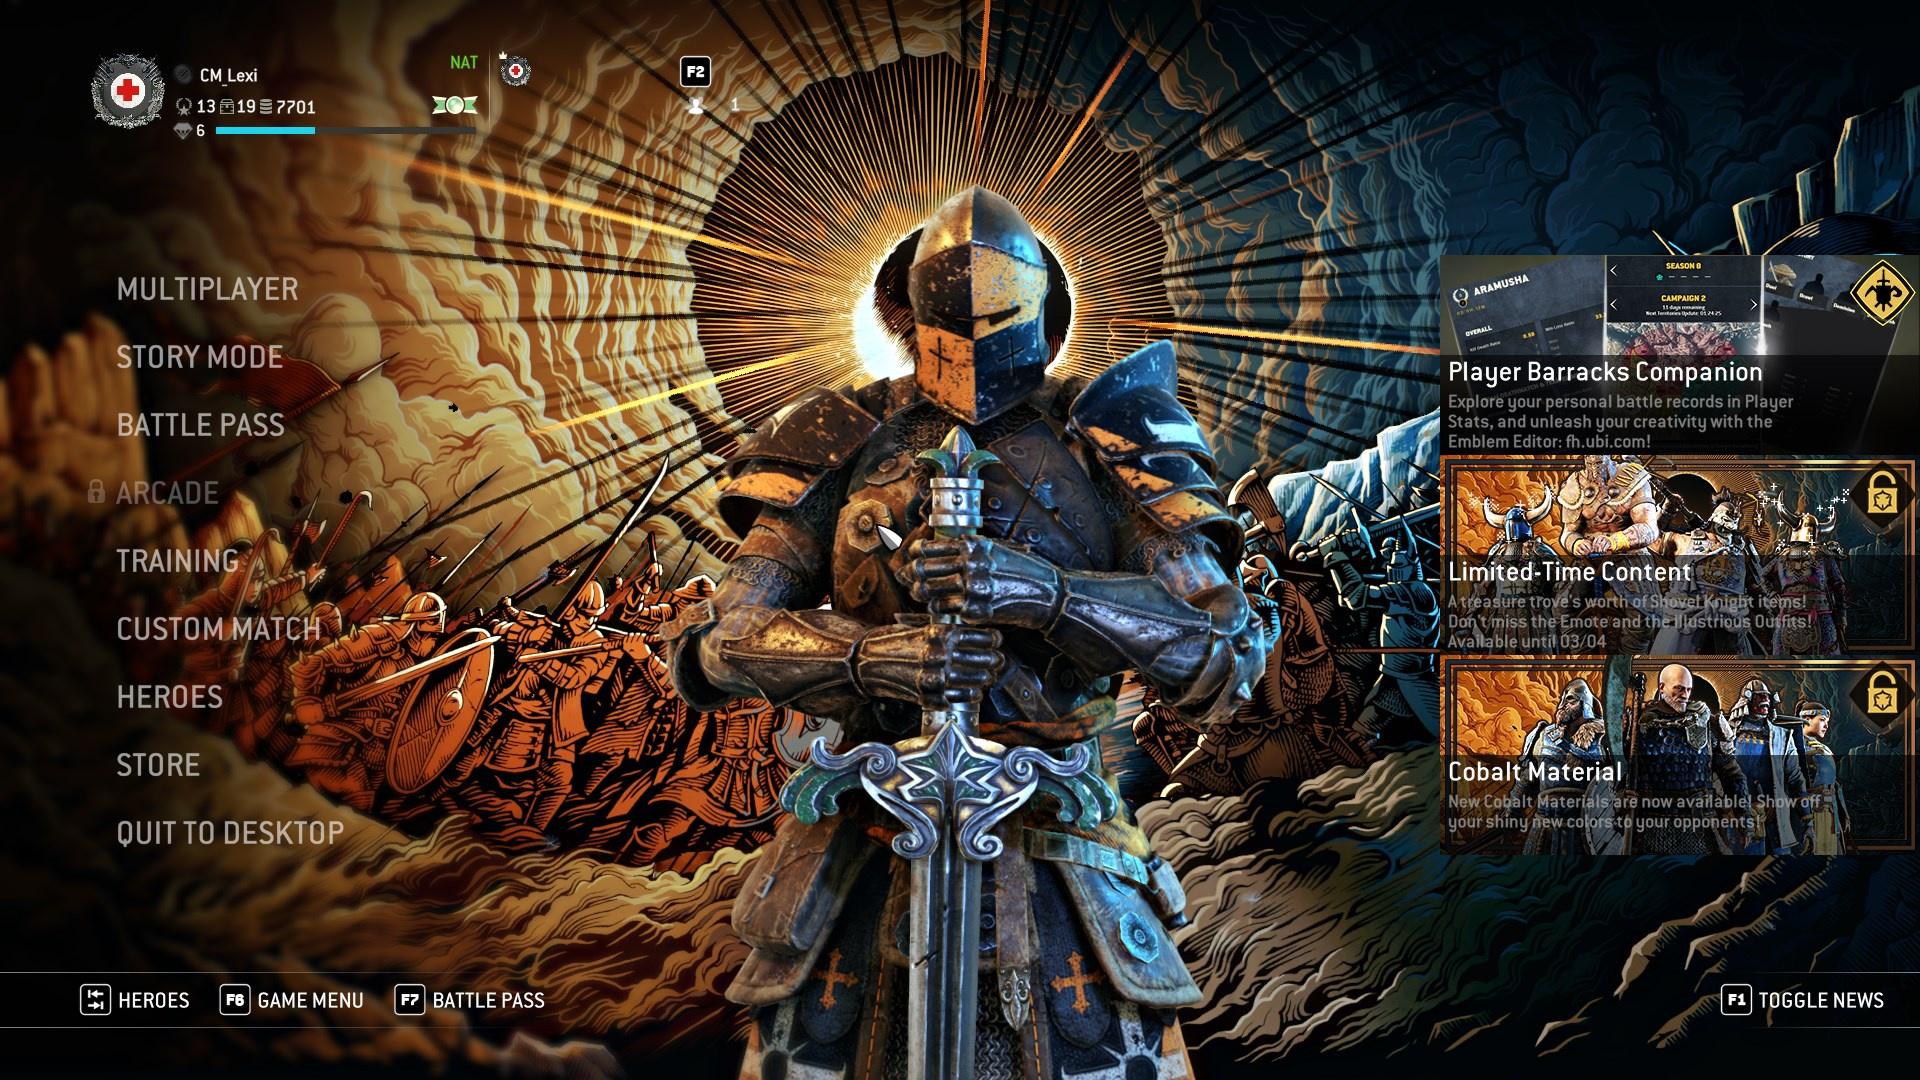 Main menu of For Honor, showing the different options, with the character Warden in the center posing